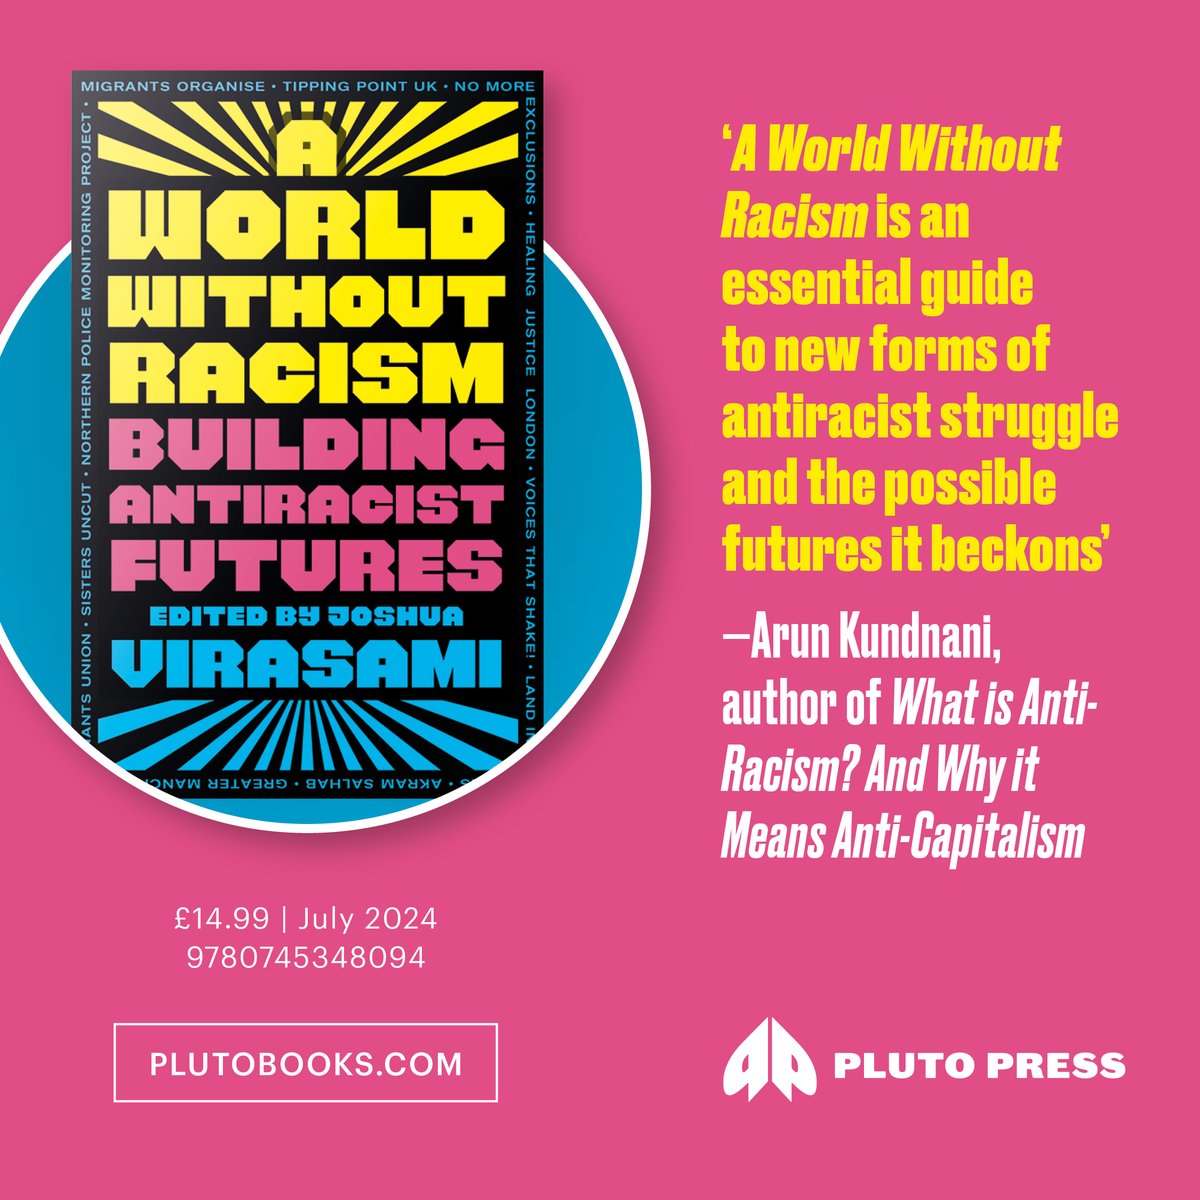 Big Announcement 📢 I'm very excited to announce that Pluto Books will be publishing my new book 'A World Without Racism' in July of this year! plutobooks.com/9780745348094/…